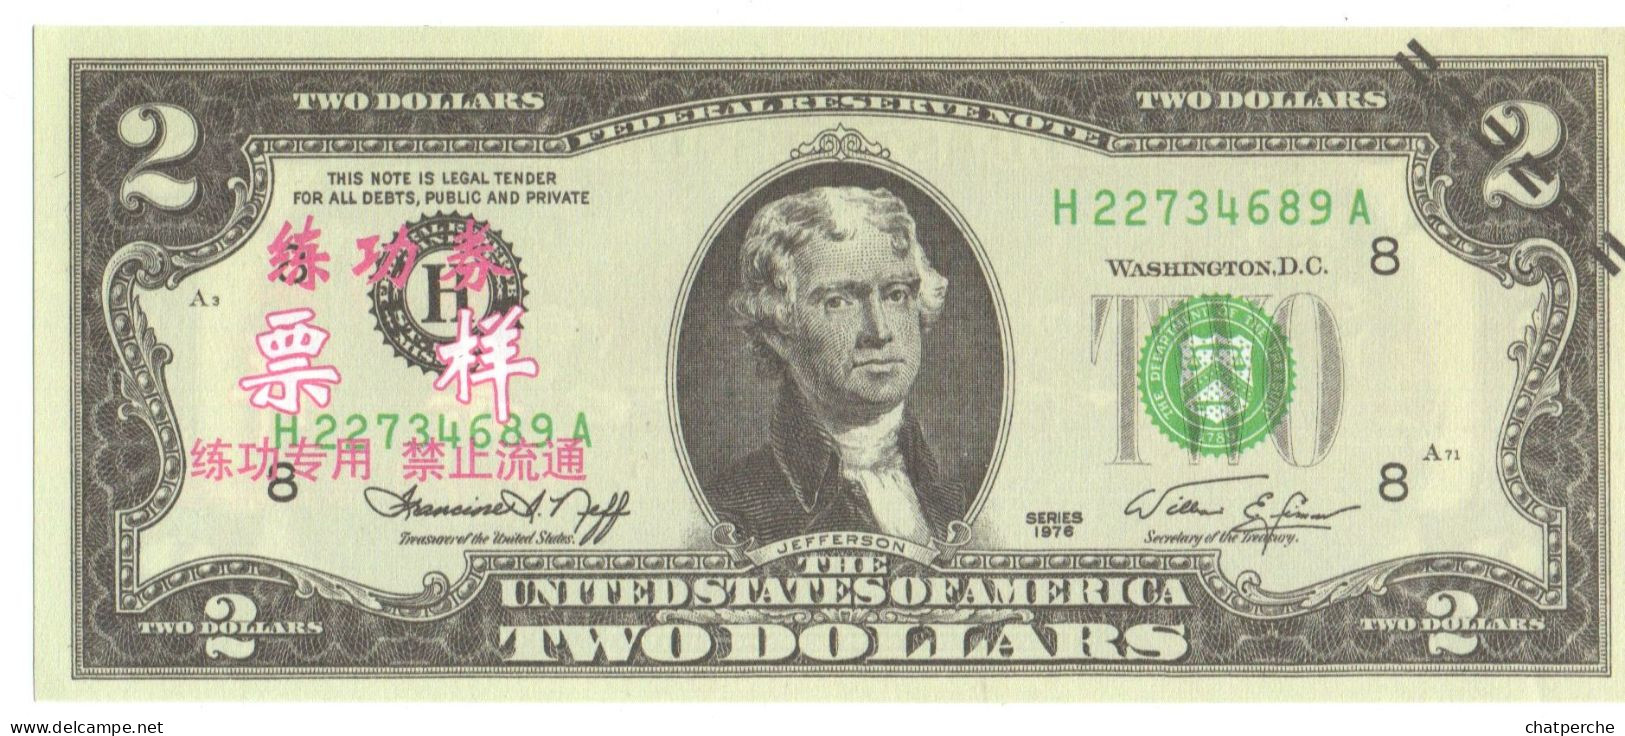 POUR COLLECTIONNEUR FAUX-BILLET FAKE 2 TWO DOLLARS THOMAS JEFFERSON USA THE UNITED STATES OF AMERICA - Errores